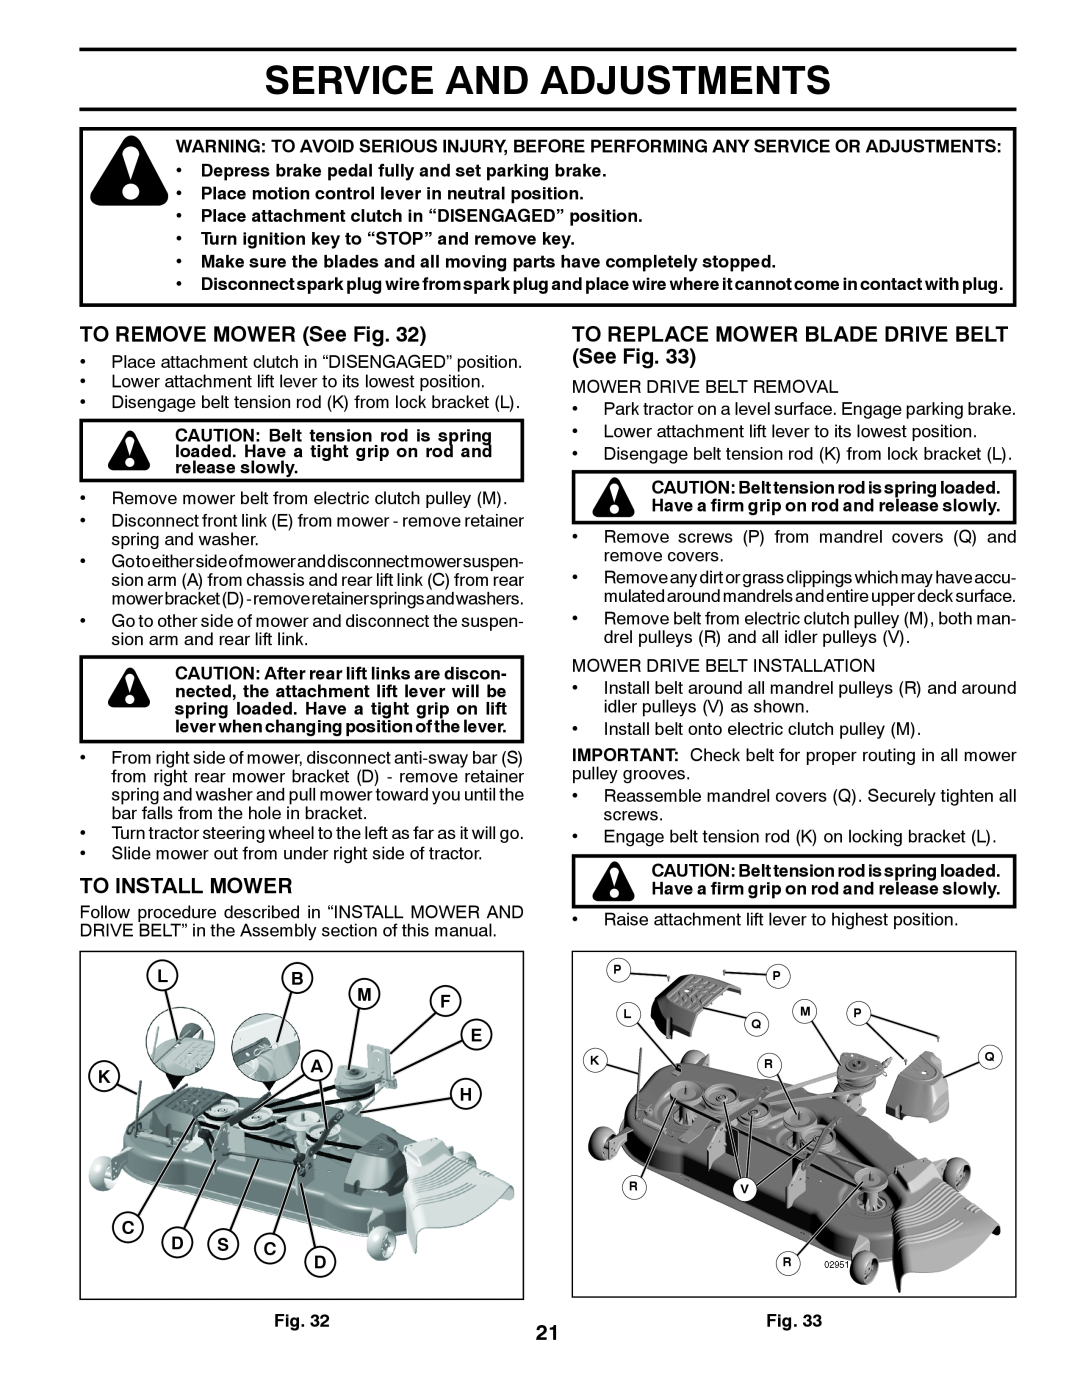 Husqvarna 532 44 00-55, 96045002800 owner manual Service And Adjustments, TO REMOVE MOWER See Fig, To Install Mower 